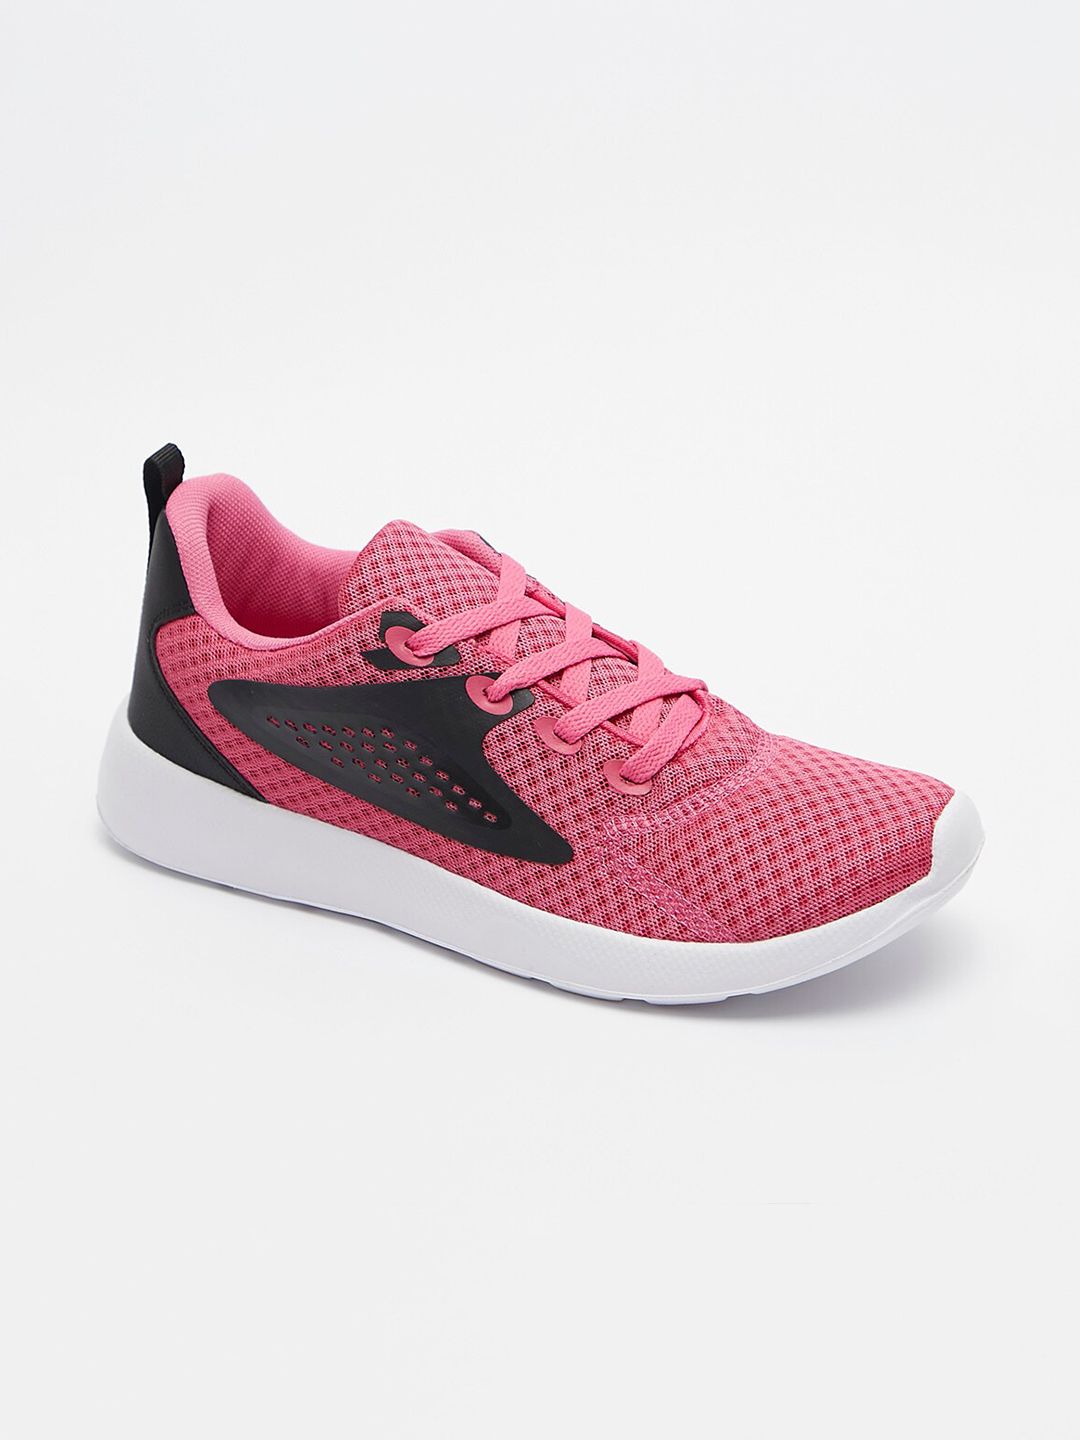 shoexpress Women Pink Textile Training or Gym Non-Marking Shoes Price in India